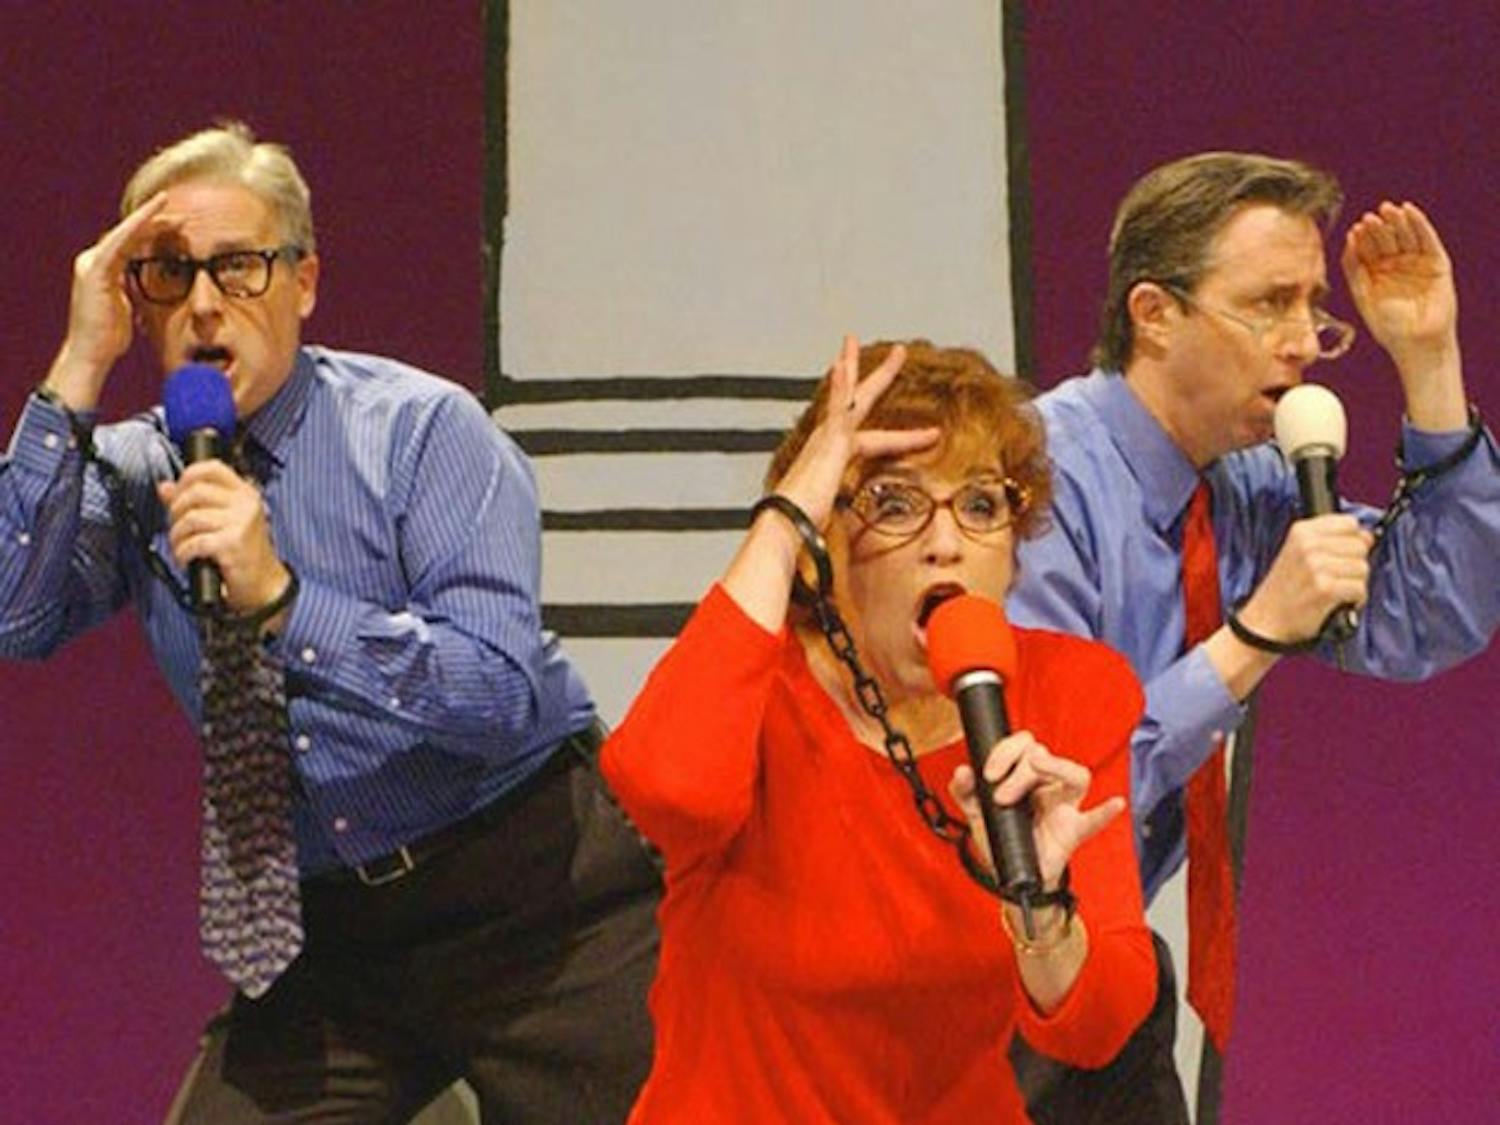 Satirical musical group The Capitol Steps will perform on Spaulding Auditorium today.